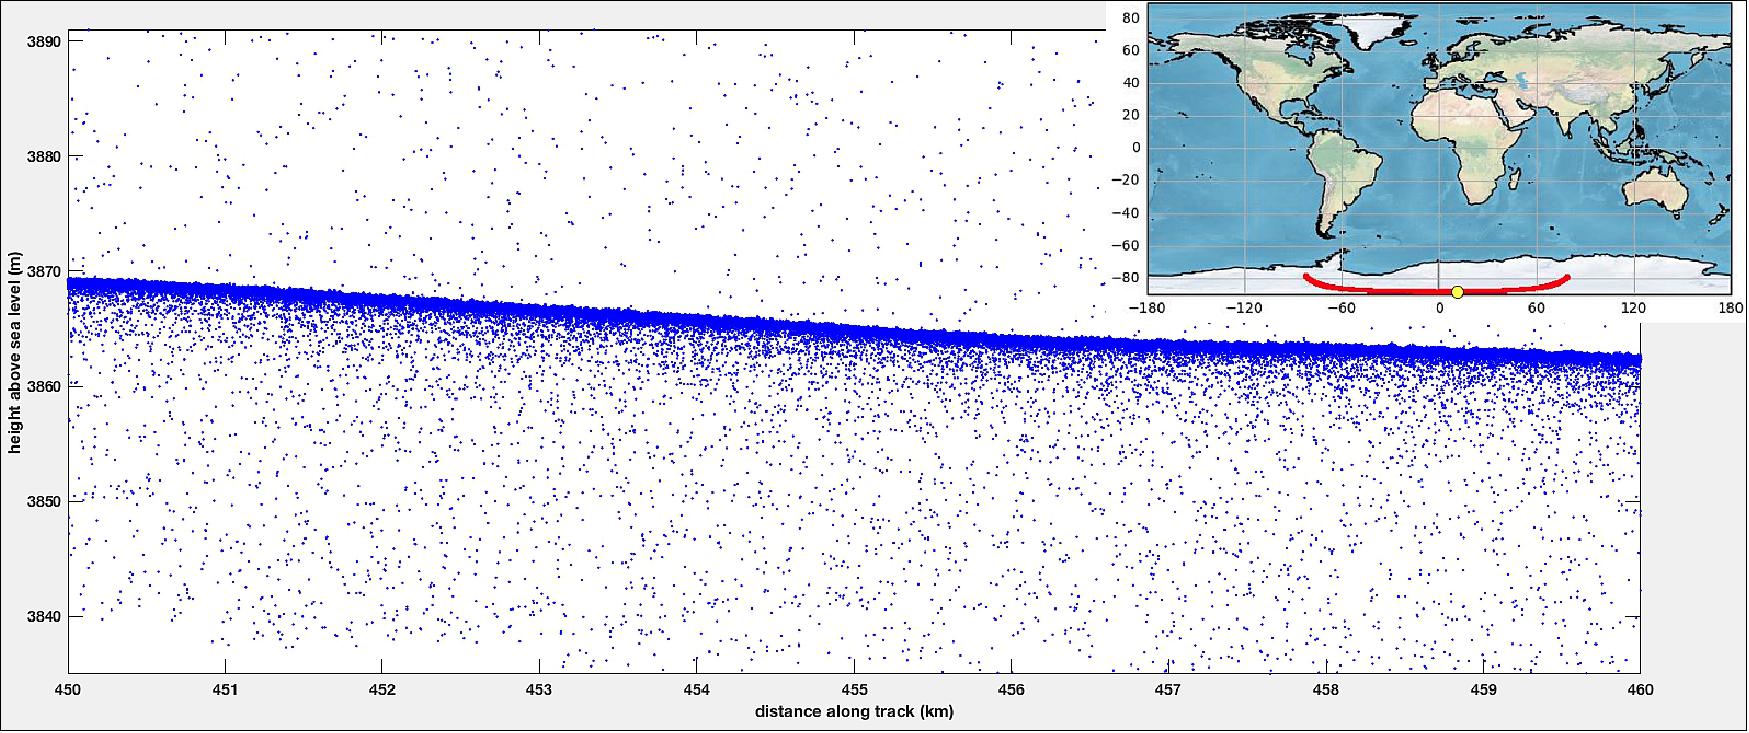 Figure 55: A visualization of ICESat-2 data, called a photon cloud, shows the first set of height measurements from the satellite, taken as it orbited over the Antarctic ice sheet. Each blue dot represents a photon detected by the ATLAS instrument. This photon cloud shows the elevation measured by photons in the middle of the ice sheet, following along 10 km of the satellite’s ground track, from left to right. The speckled dots are background photons from sunlight, but the thick blue line is actually a concentration of dots that represent laser photons that returned to the ICESat-2 satellite (image credit: NASA's Goddard Space Flight Center)